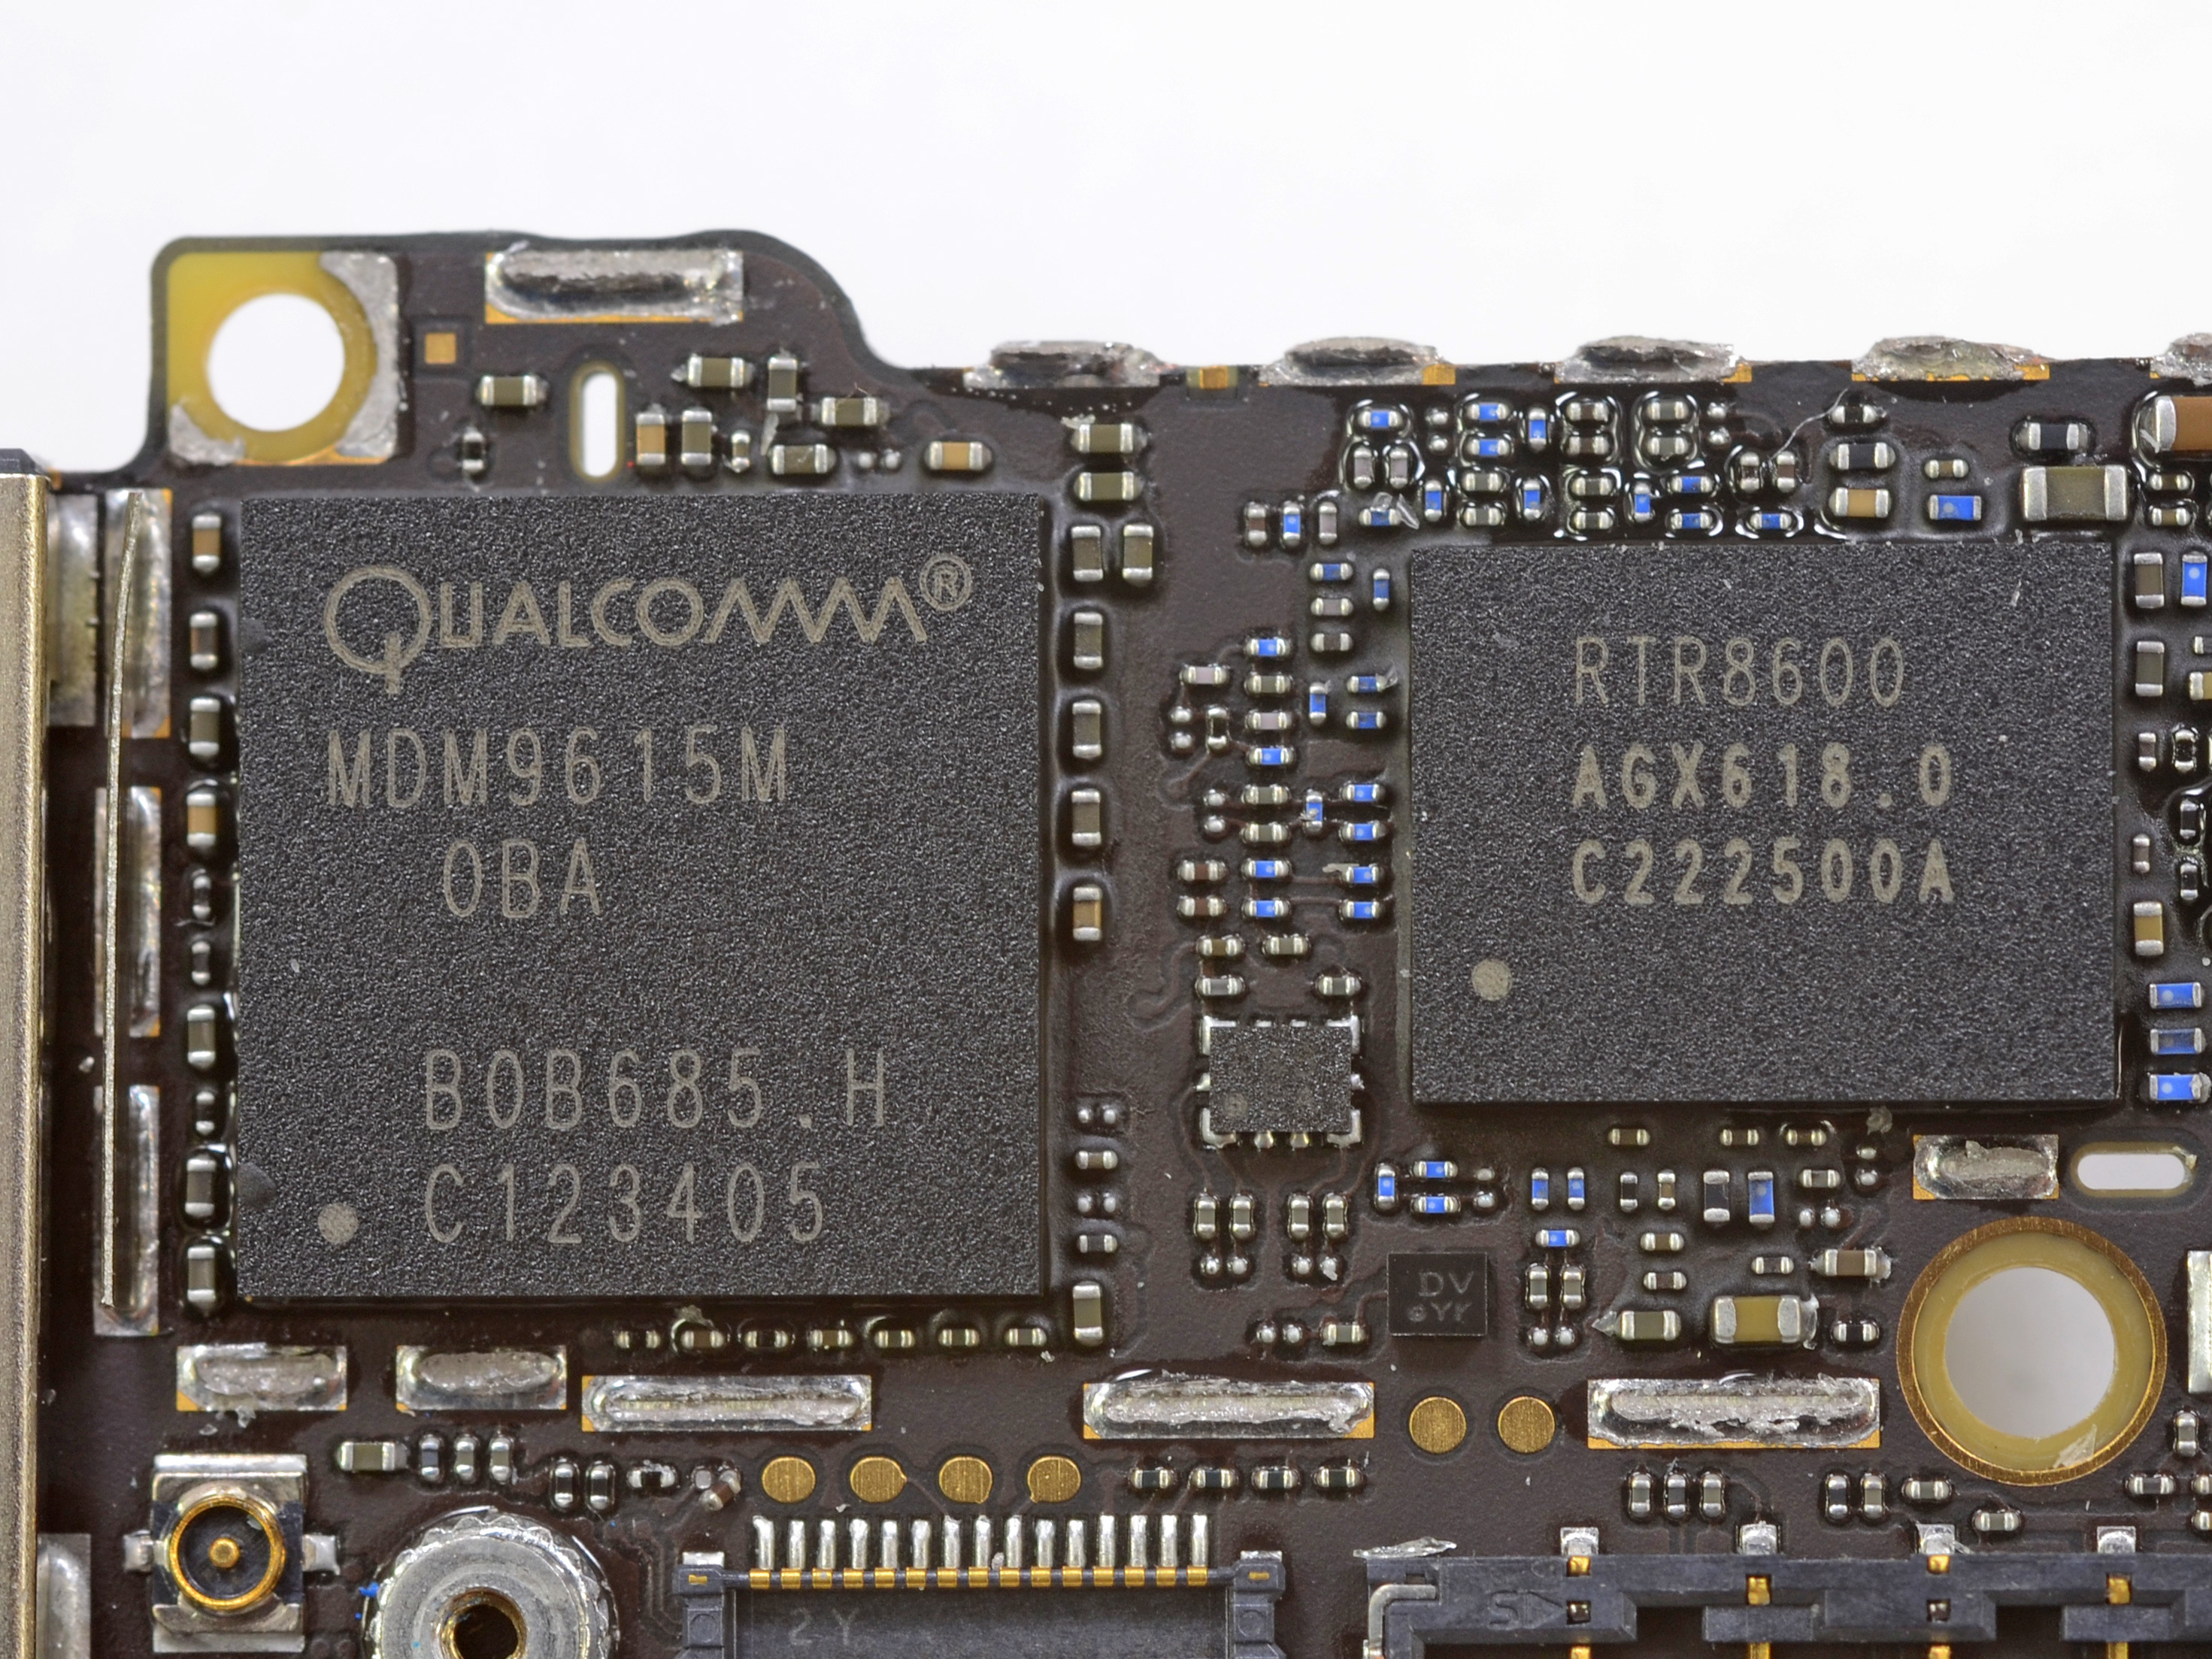 Cellular Connectivity: LTE with MDM9615 - The iPhone 5 Review